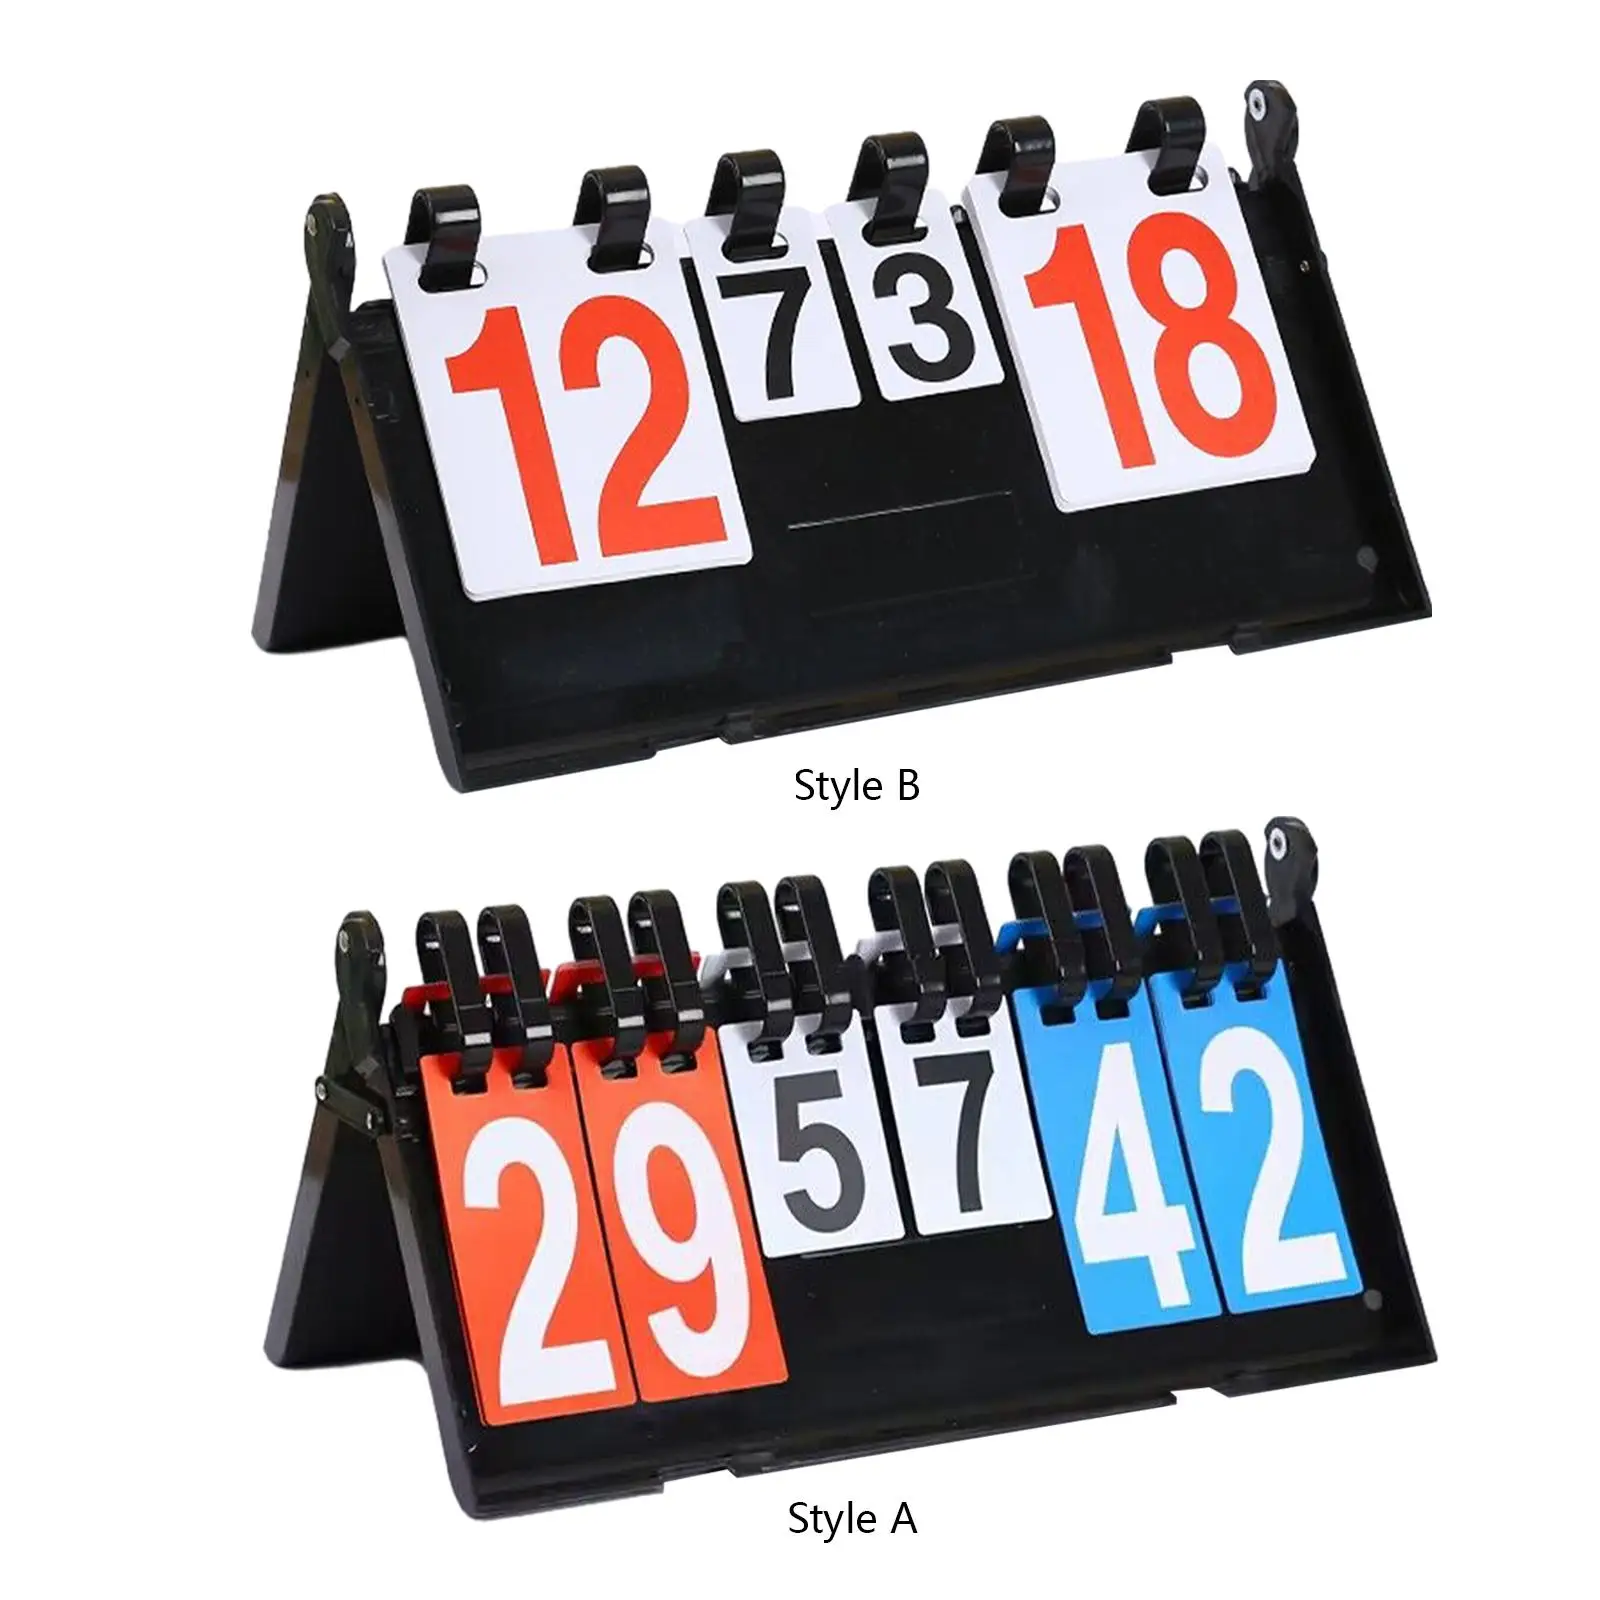 Score Card Flipper Numbers Scoreboard Compact Tabletop Scoreboard for Table Tennis Basketball Volleyball Team Games Billiards